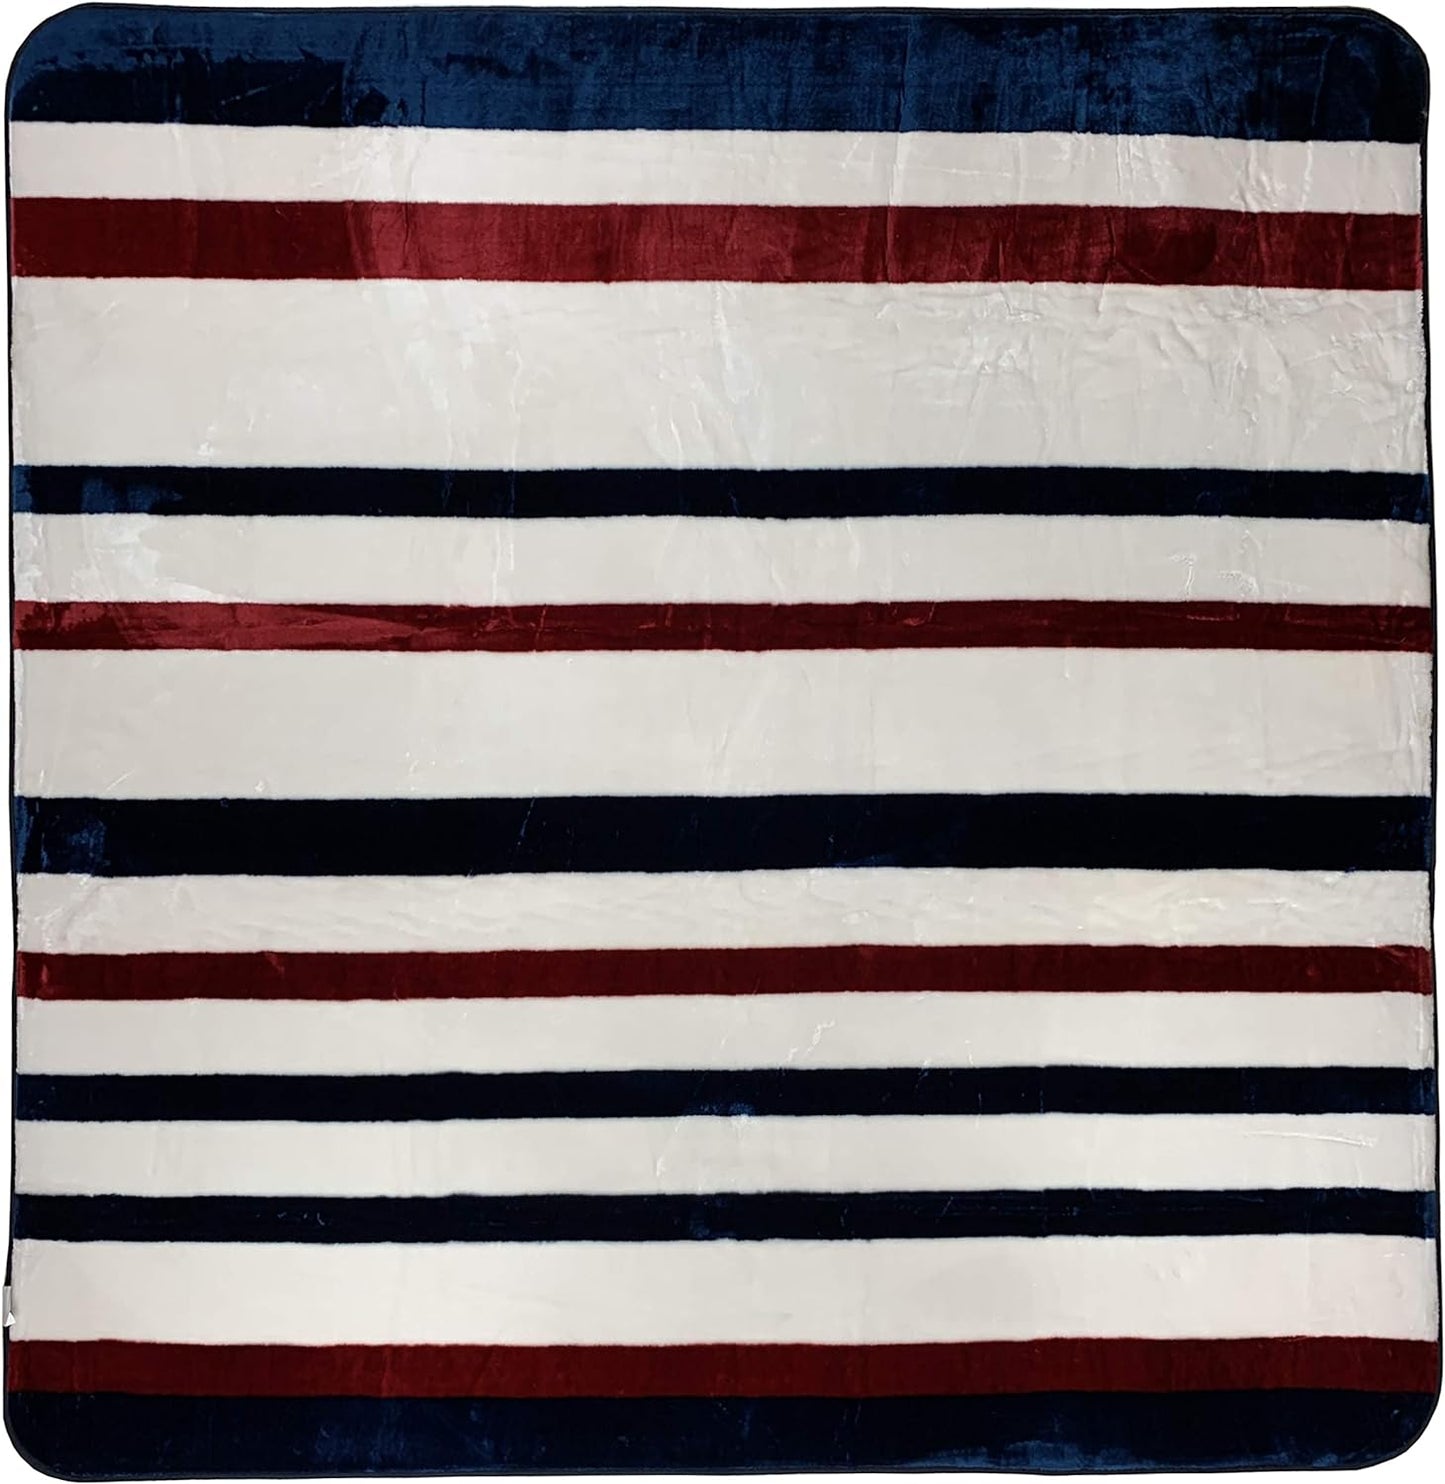 Blanket Stripe Design Area Rug Rugs Fabric Backing (White Red Navy Blue, 6 x 6 (6'1' x 6'1")